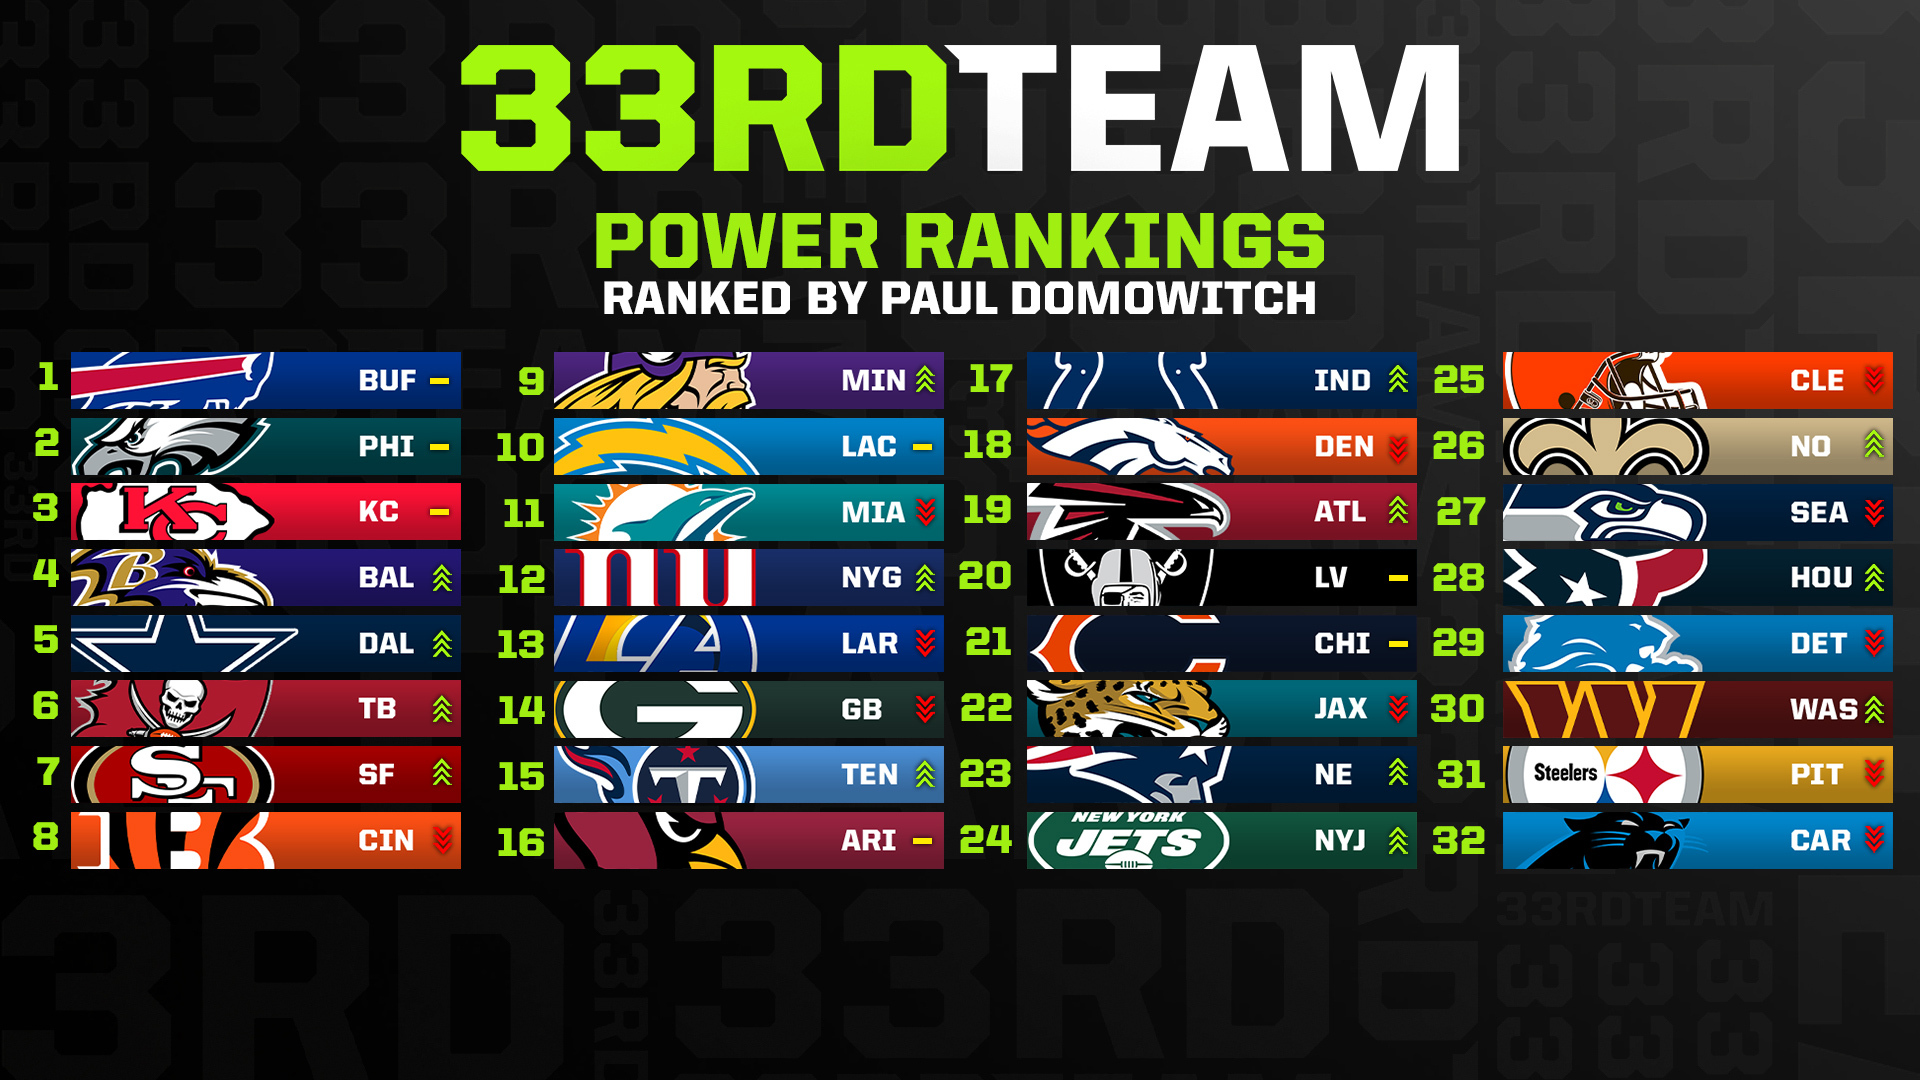 Week 6 NFL Power Rankings: Cowboys, Jets Among Biggest Movers